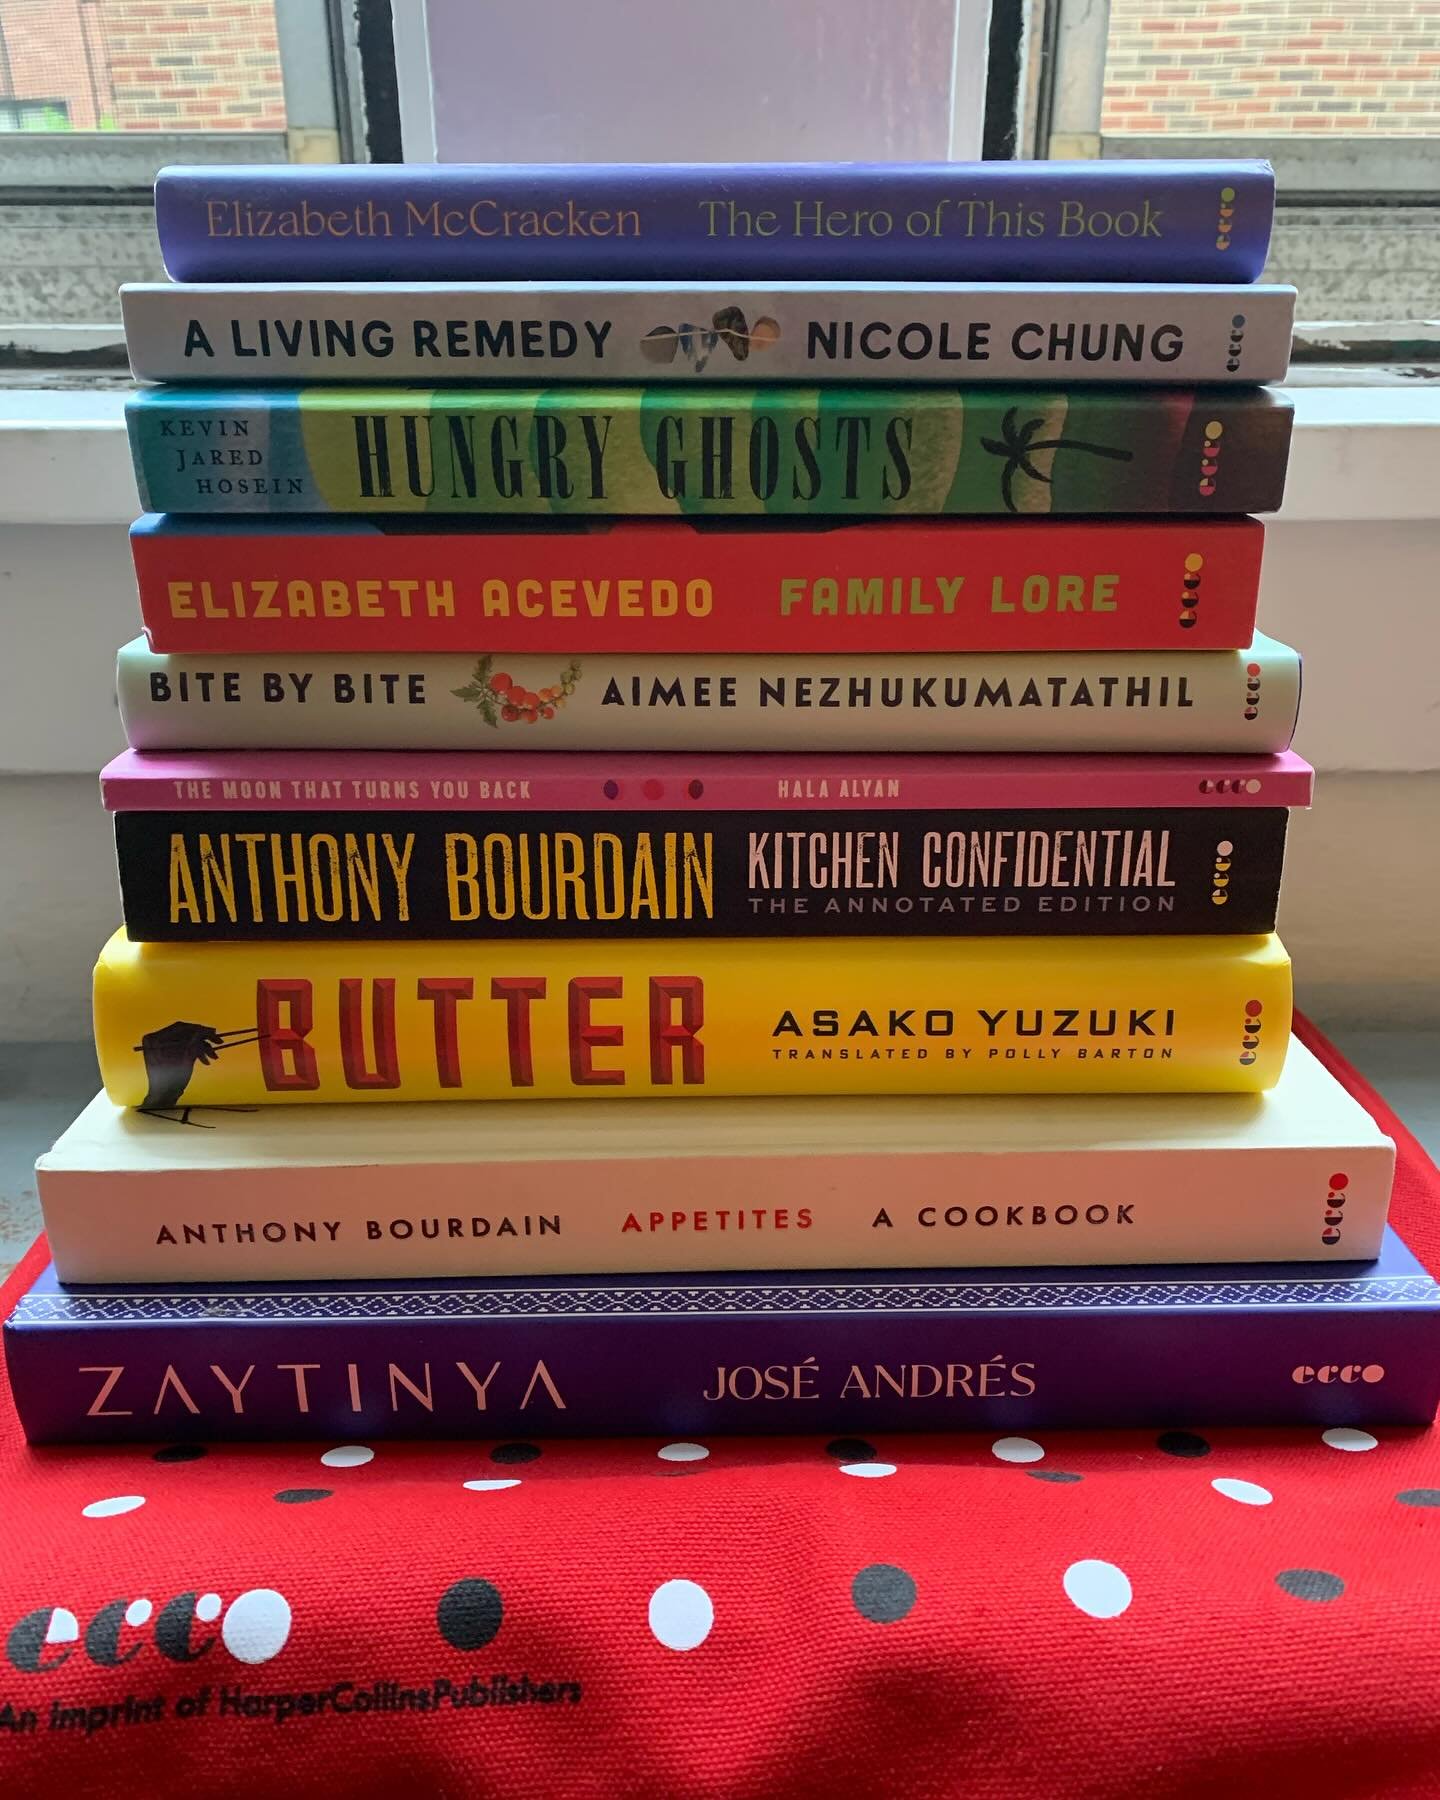 Came back from NYC with a giant stack of @eccobooks ! Thank you, @gabrielladoob and @miriamparker ! Can&rsquo;t wait to dive in. 

@chefjoseandres @hala.n.alyan @aimee_nezhukumatathil @acevedowrites @kjaredhosein @nicolesjchung @elizmccrack